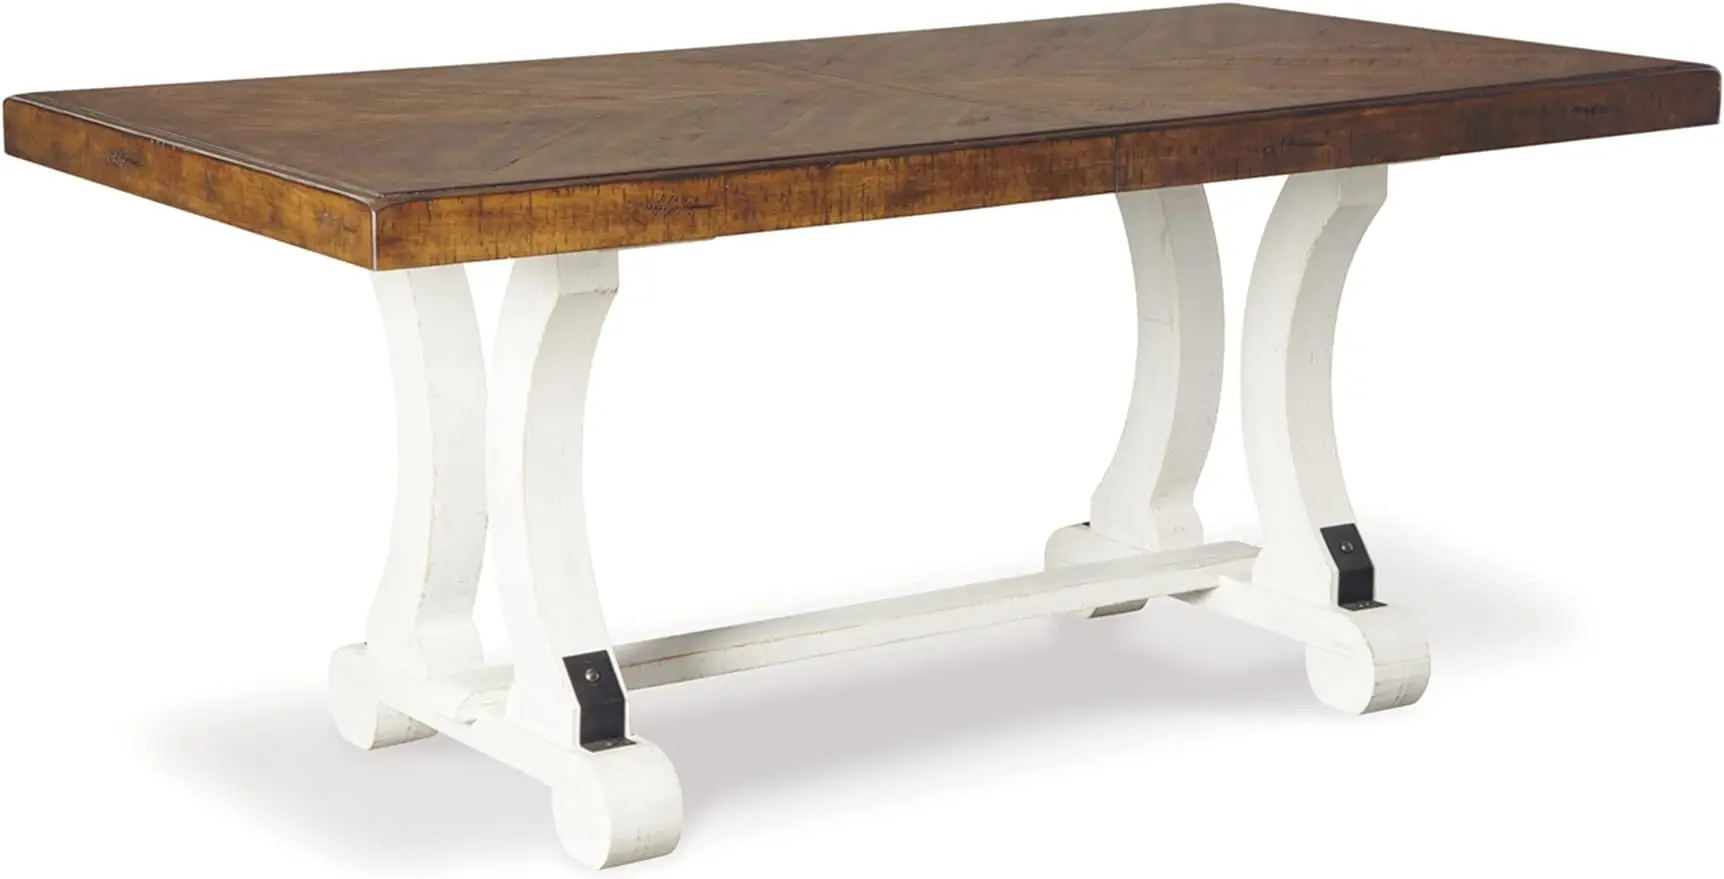 

Signature Design by Ashley Valebeck Farmhouse Rectangular Extension Dining Table, Fits up to 8, White & Brown